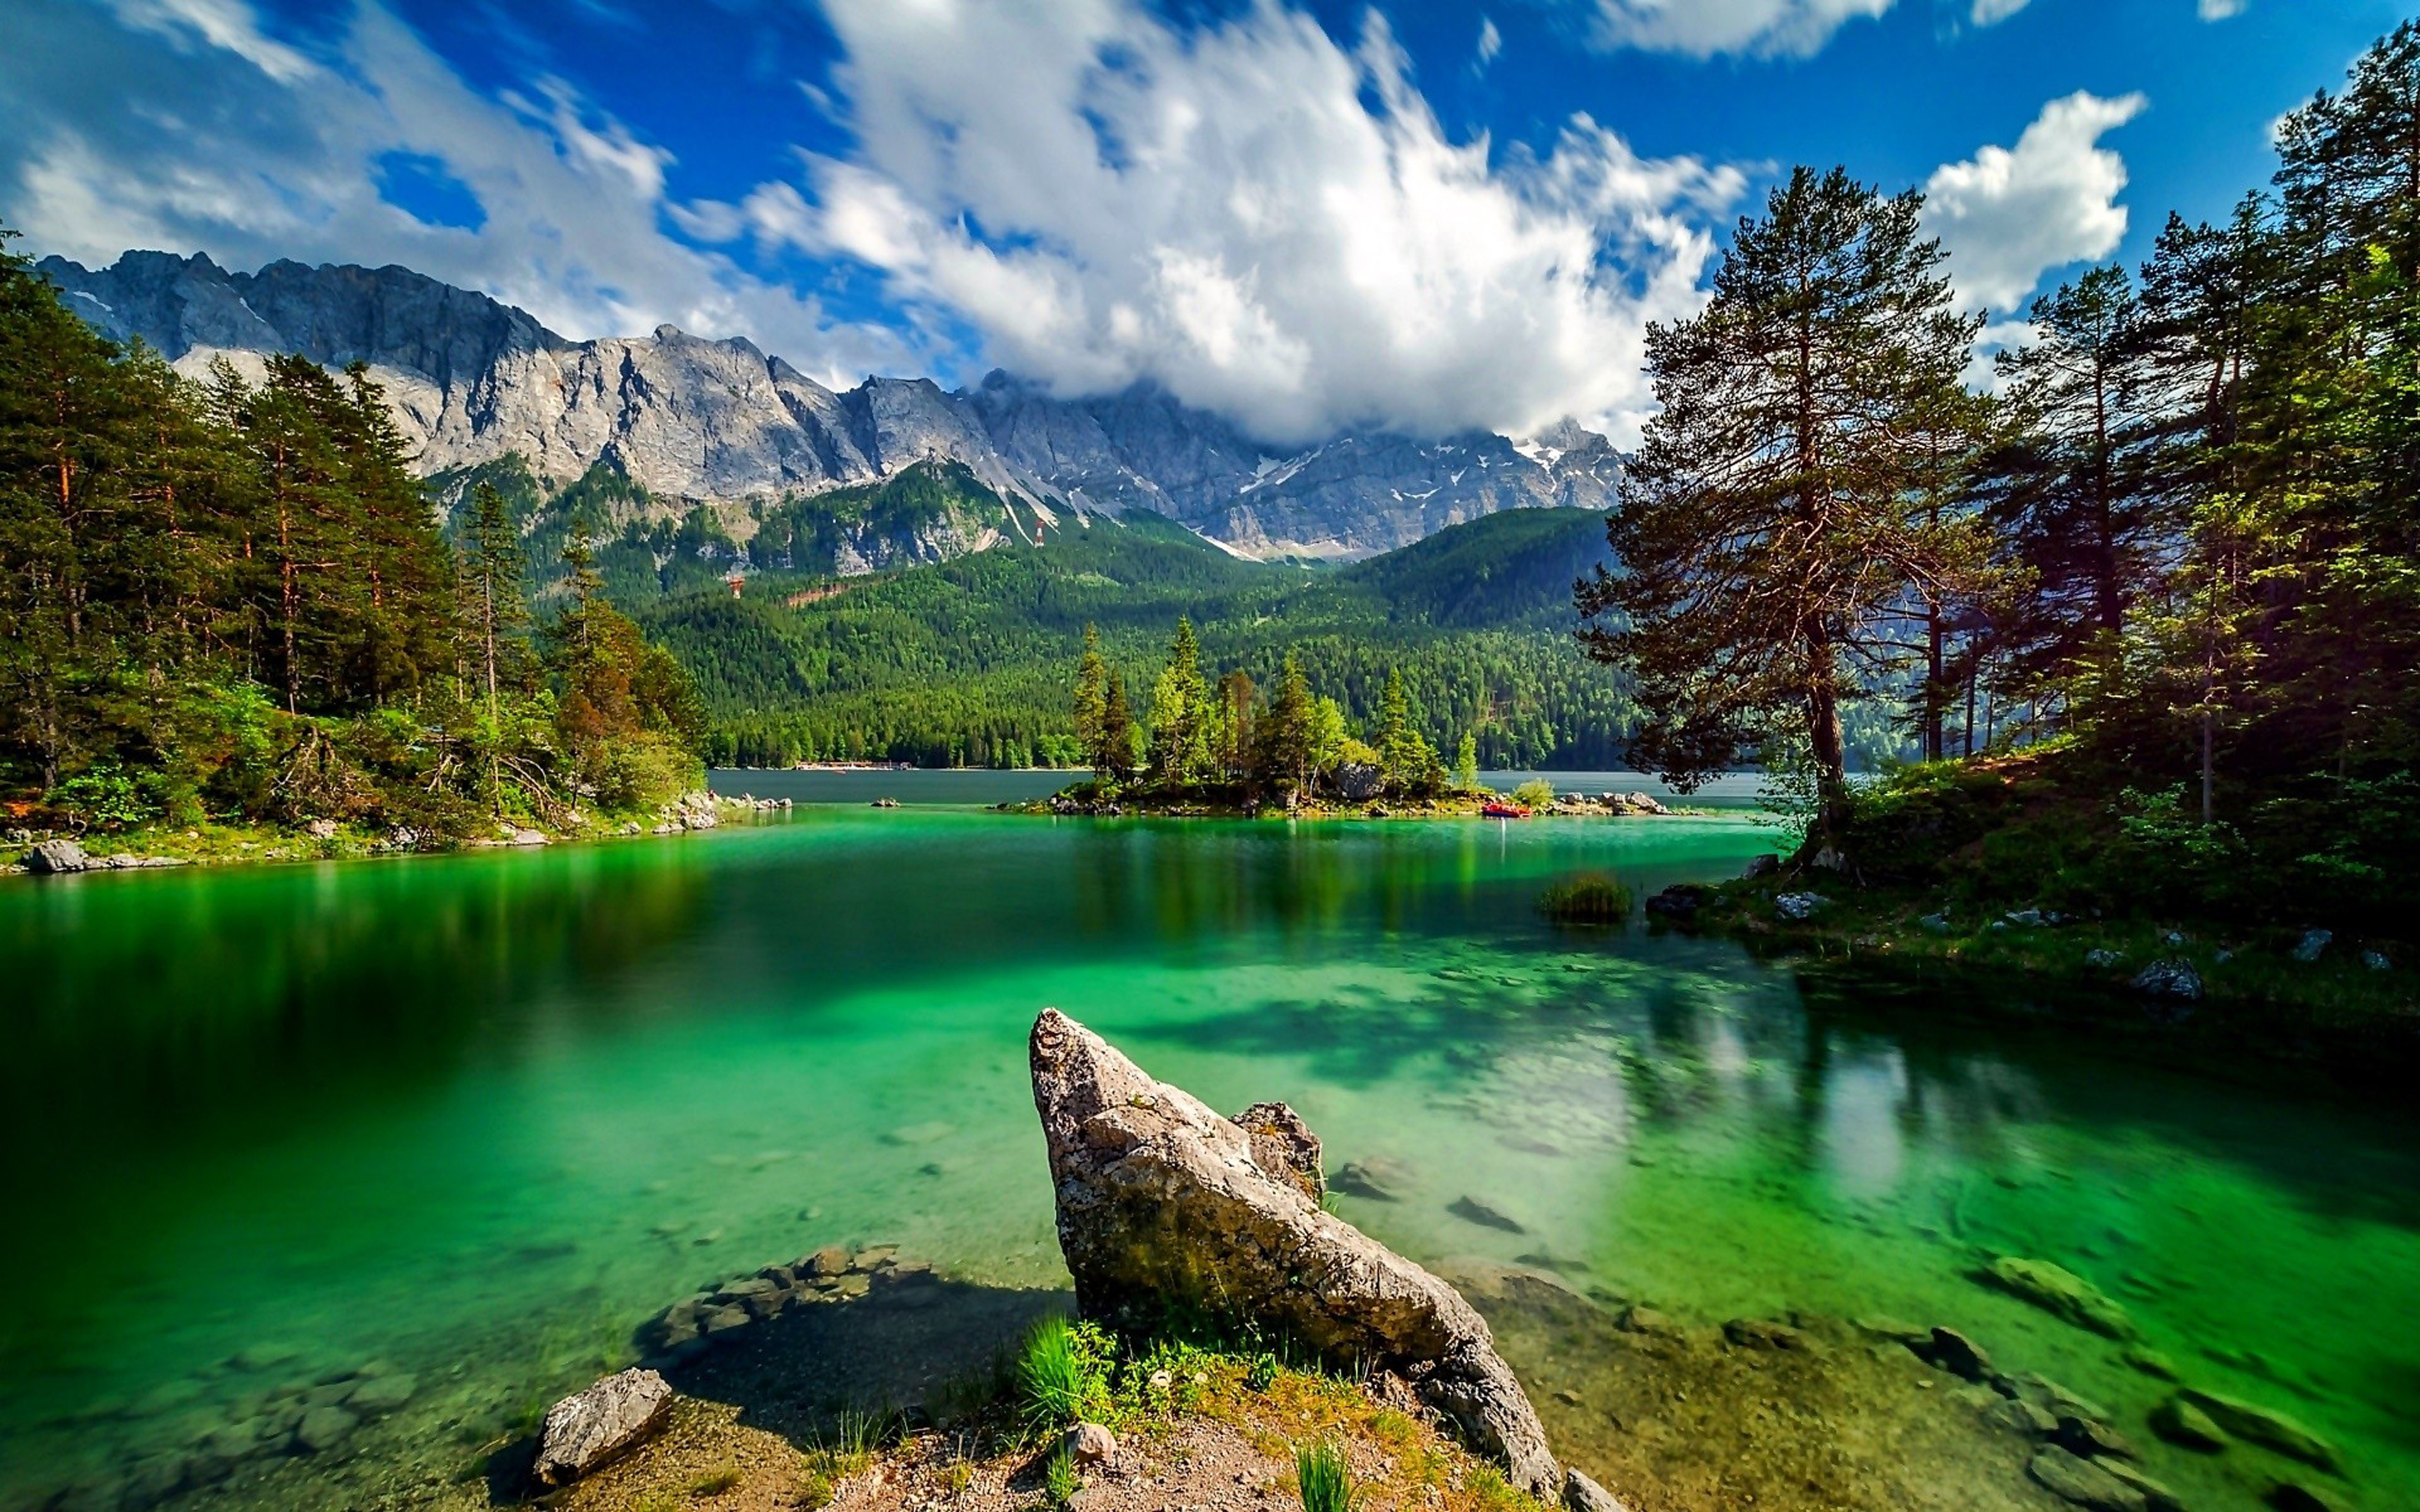 Eibsee lake in Bavaria Ggermany Lake with turquoise green water rock island rocky mountains pine forest sky with white clouds summer HD wallpaper 3840x2400, Wallpaper13.com